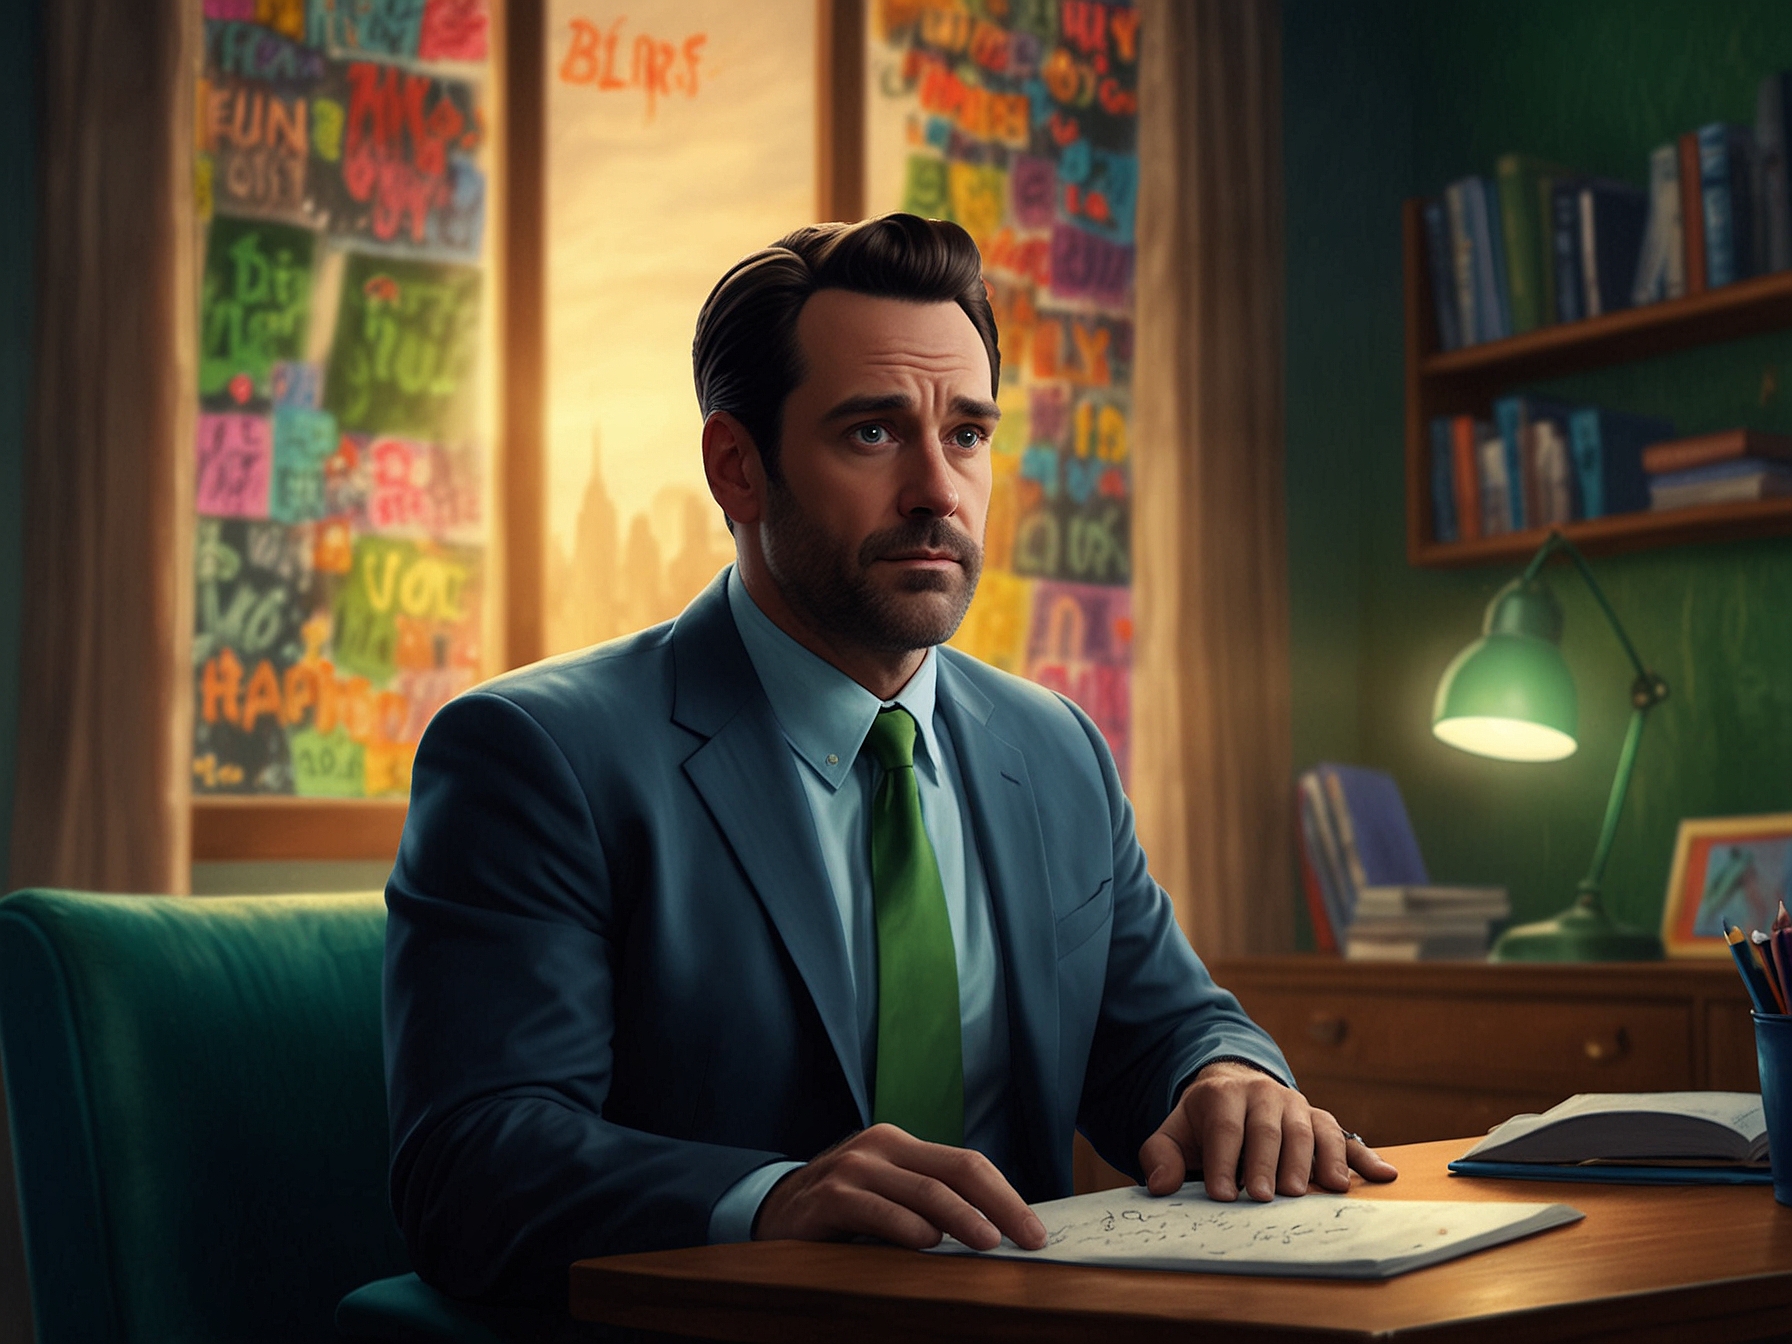 Paul Walter Hauser and Jon Hamm animated in a brainstorming session, conceptualizing the character of Envy within the vibrant, emotional backdrop of the Inside Out universe.